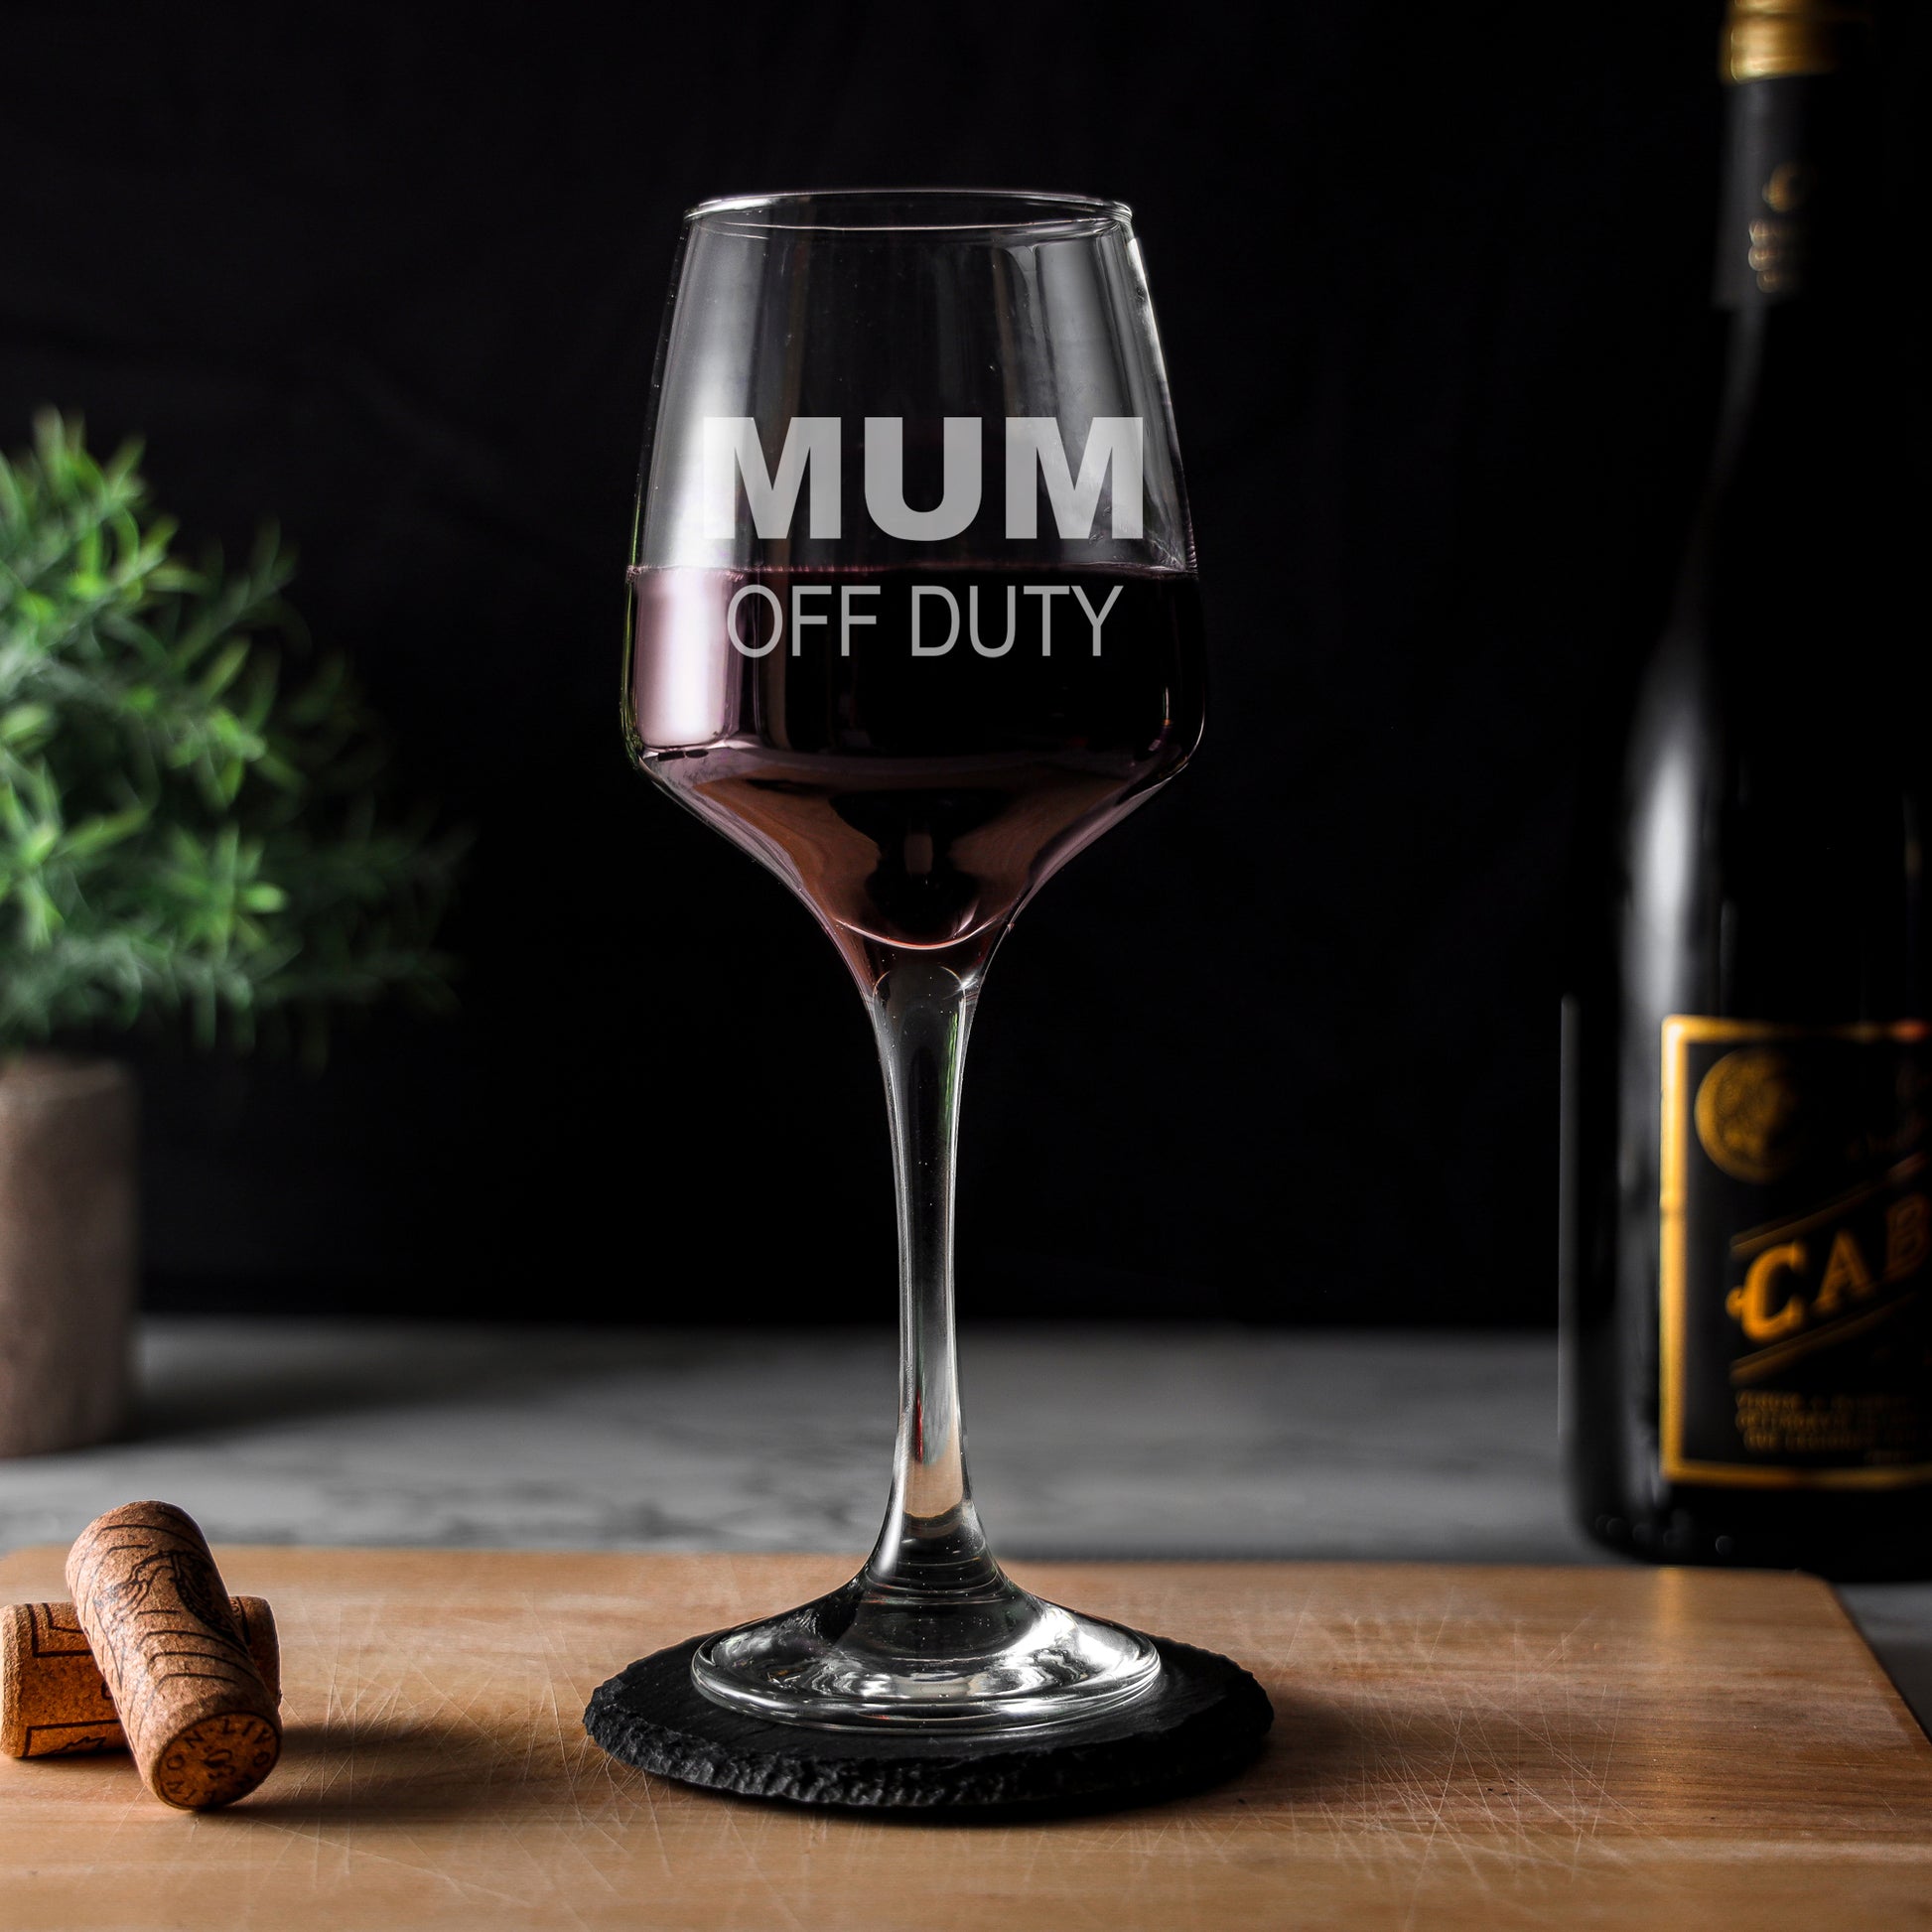 Engraved "Mum Off Duty" Novelty Wine Glass and/or Coaster Set  - Always Looking Good -   